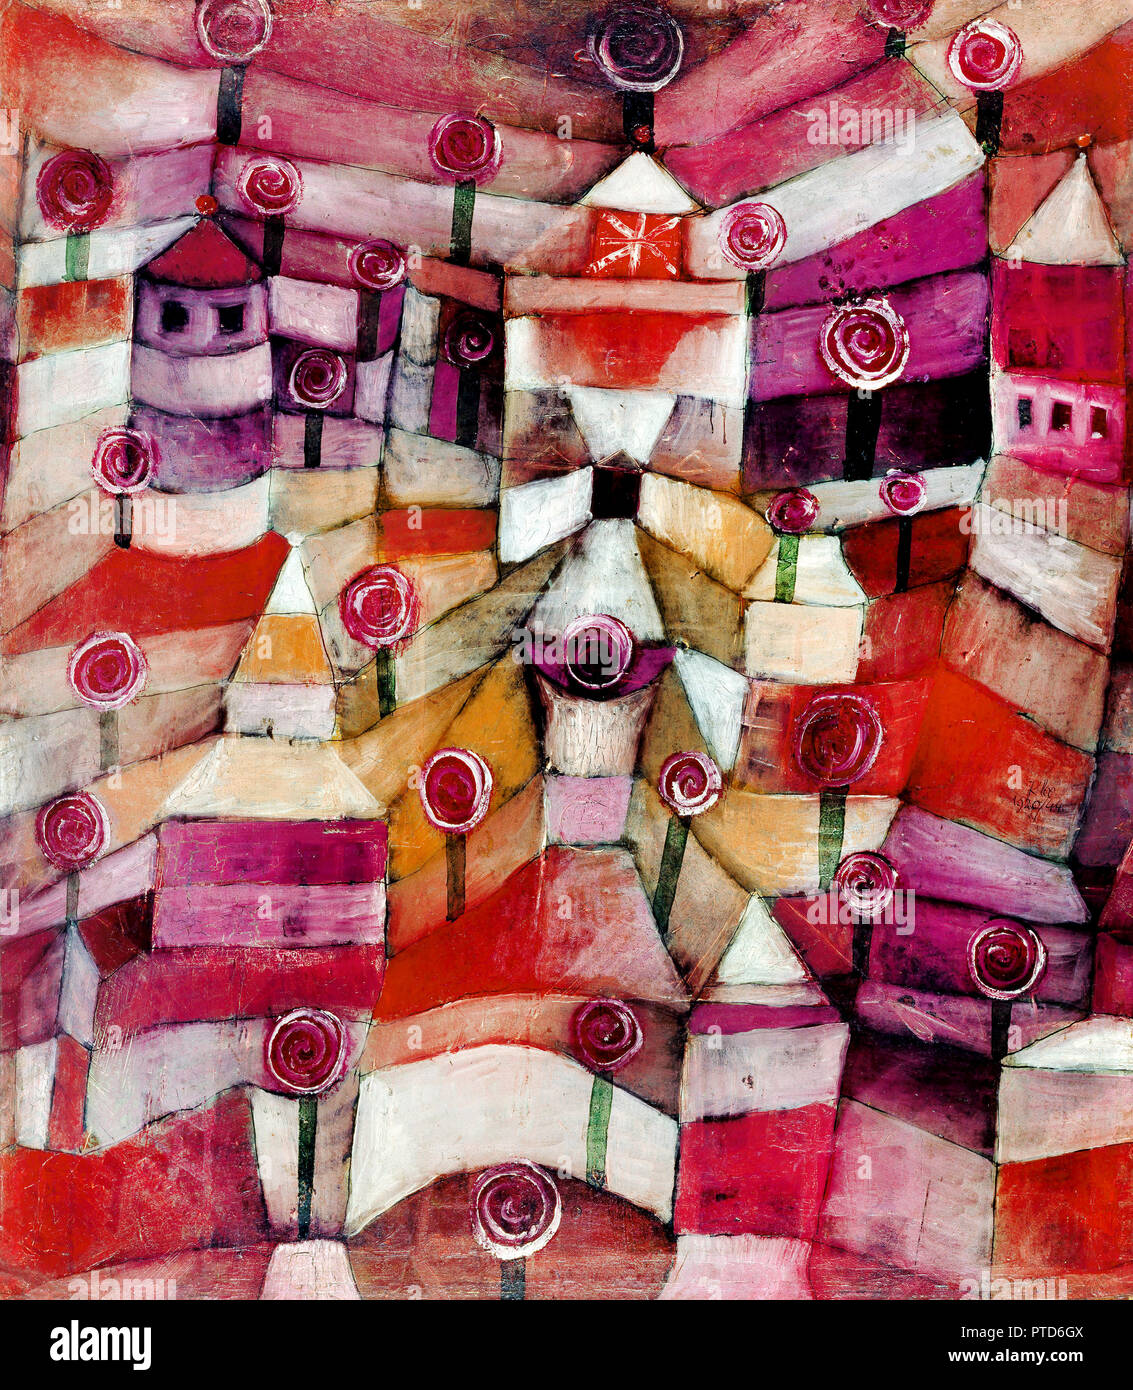 Paul Klee, Rose Garden 1920 Oil on canvas, Staedtische Gallery in Lenbachhaus and Kunstbau, Germany. Stock Photo